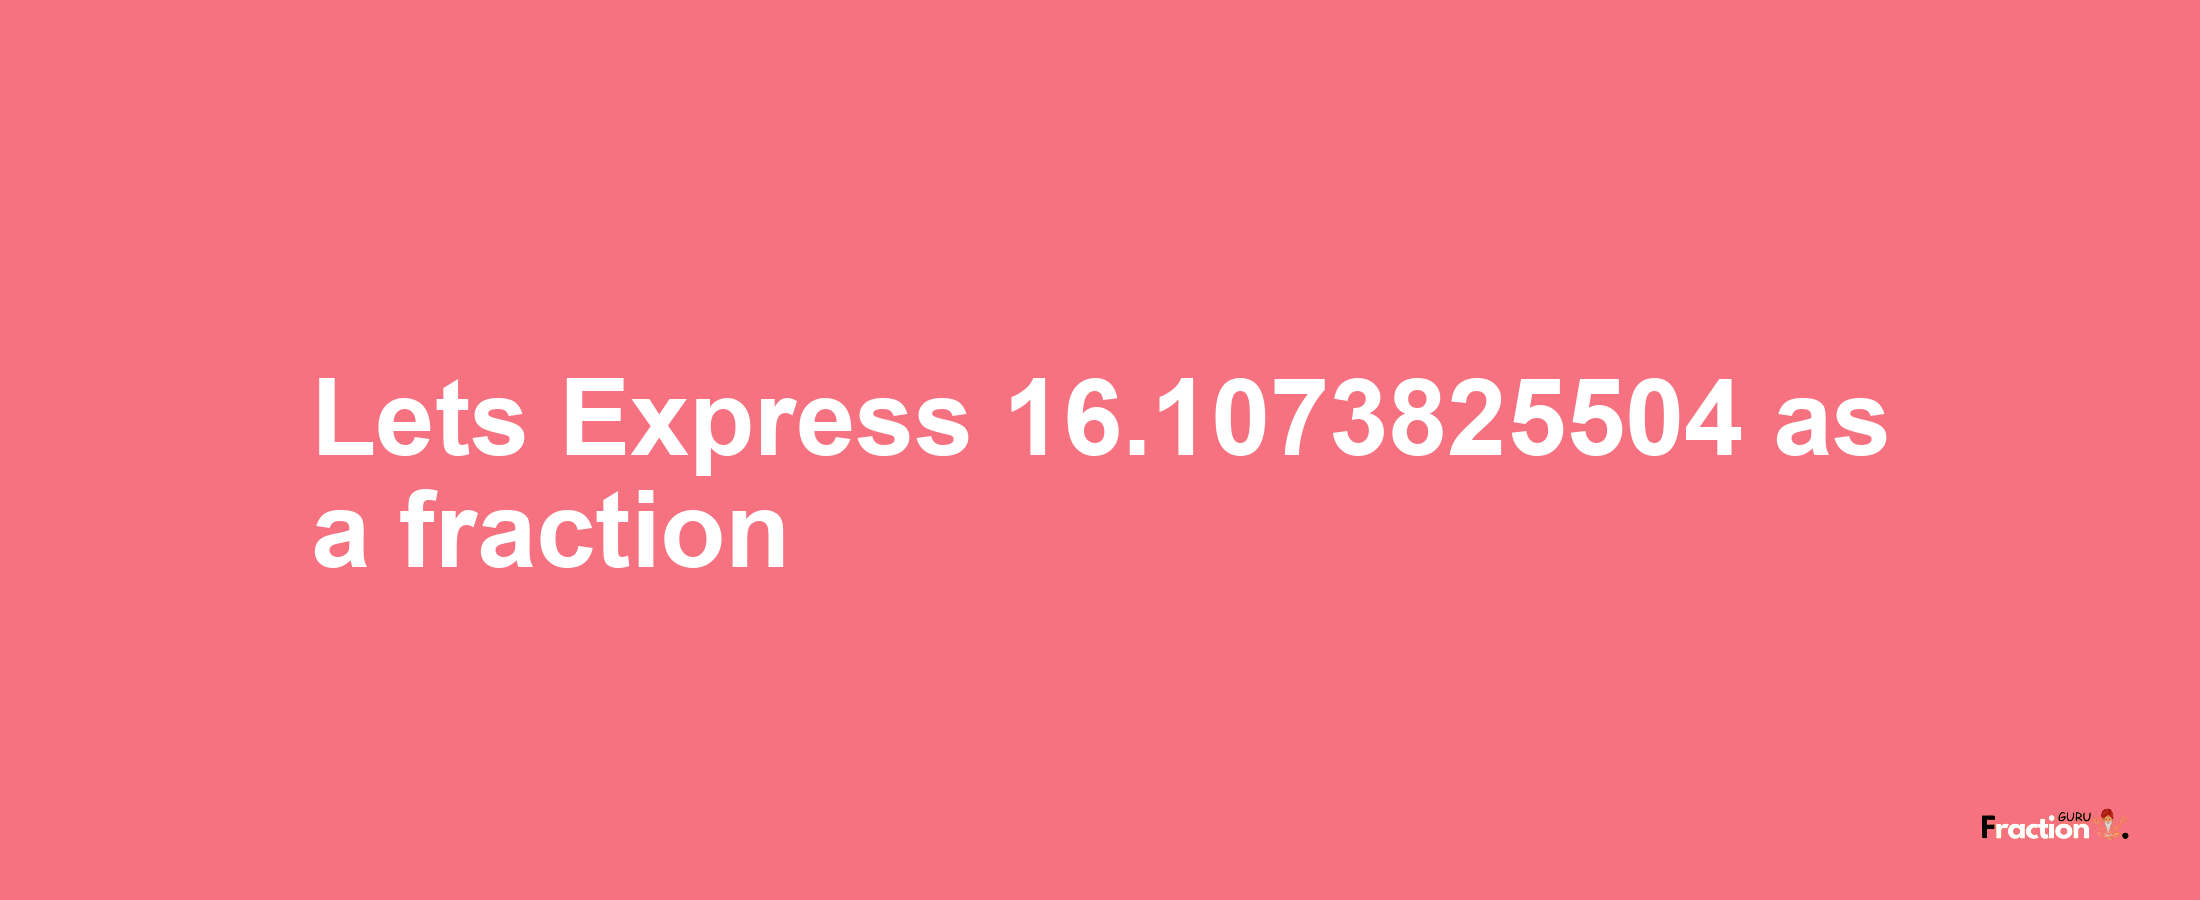 Lets Express 16.1073825504 as afraction